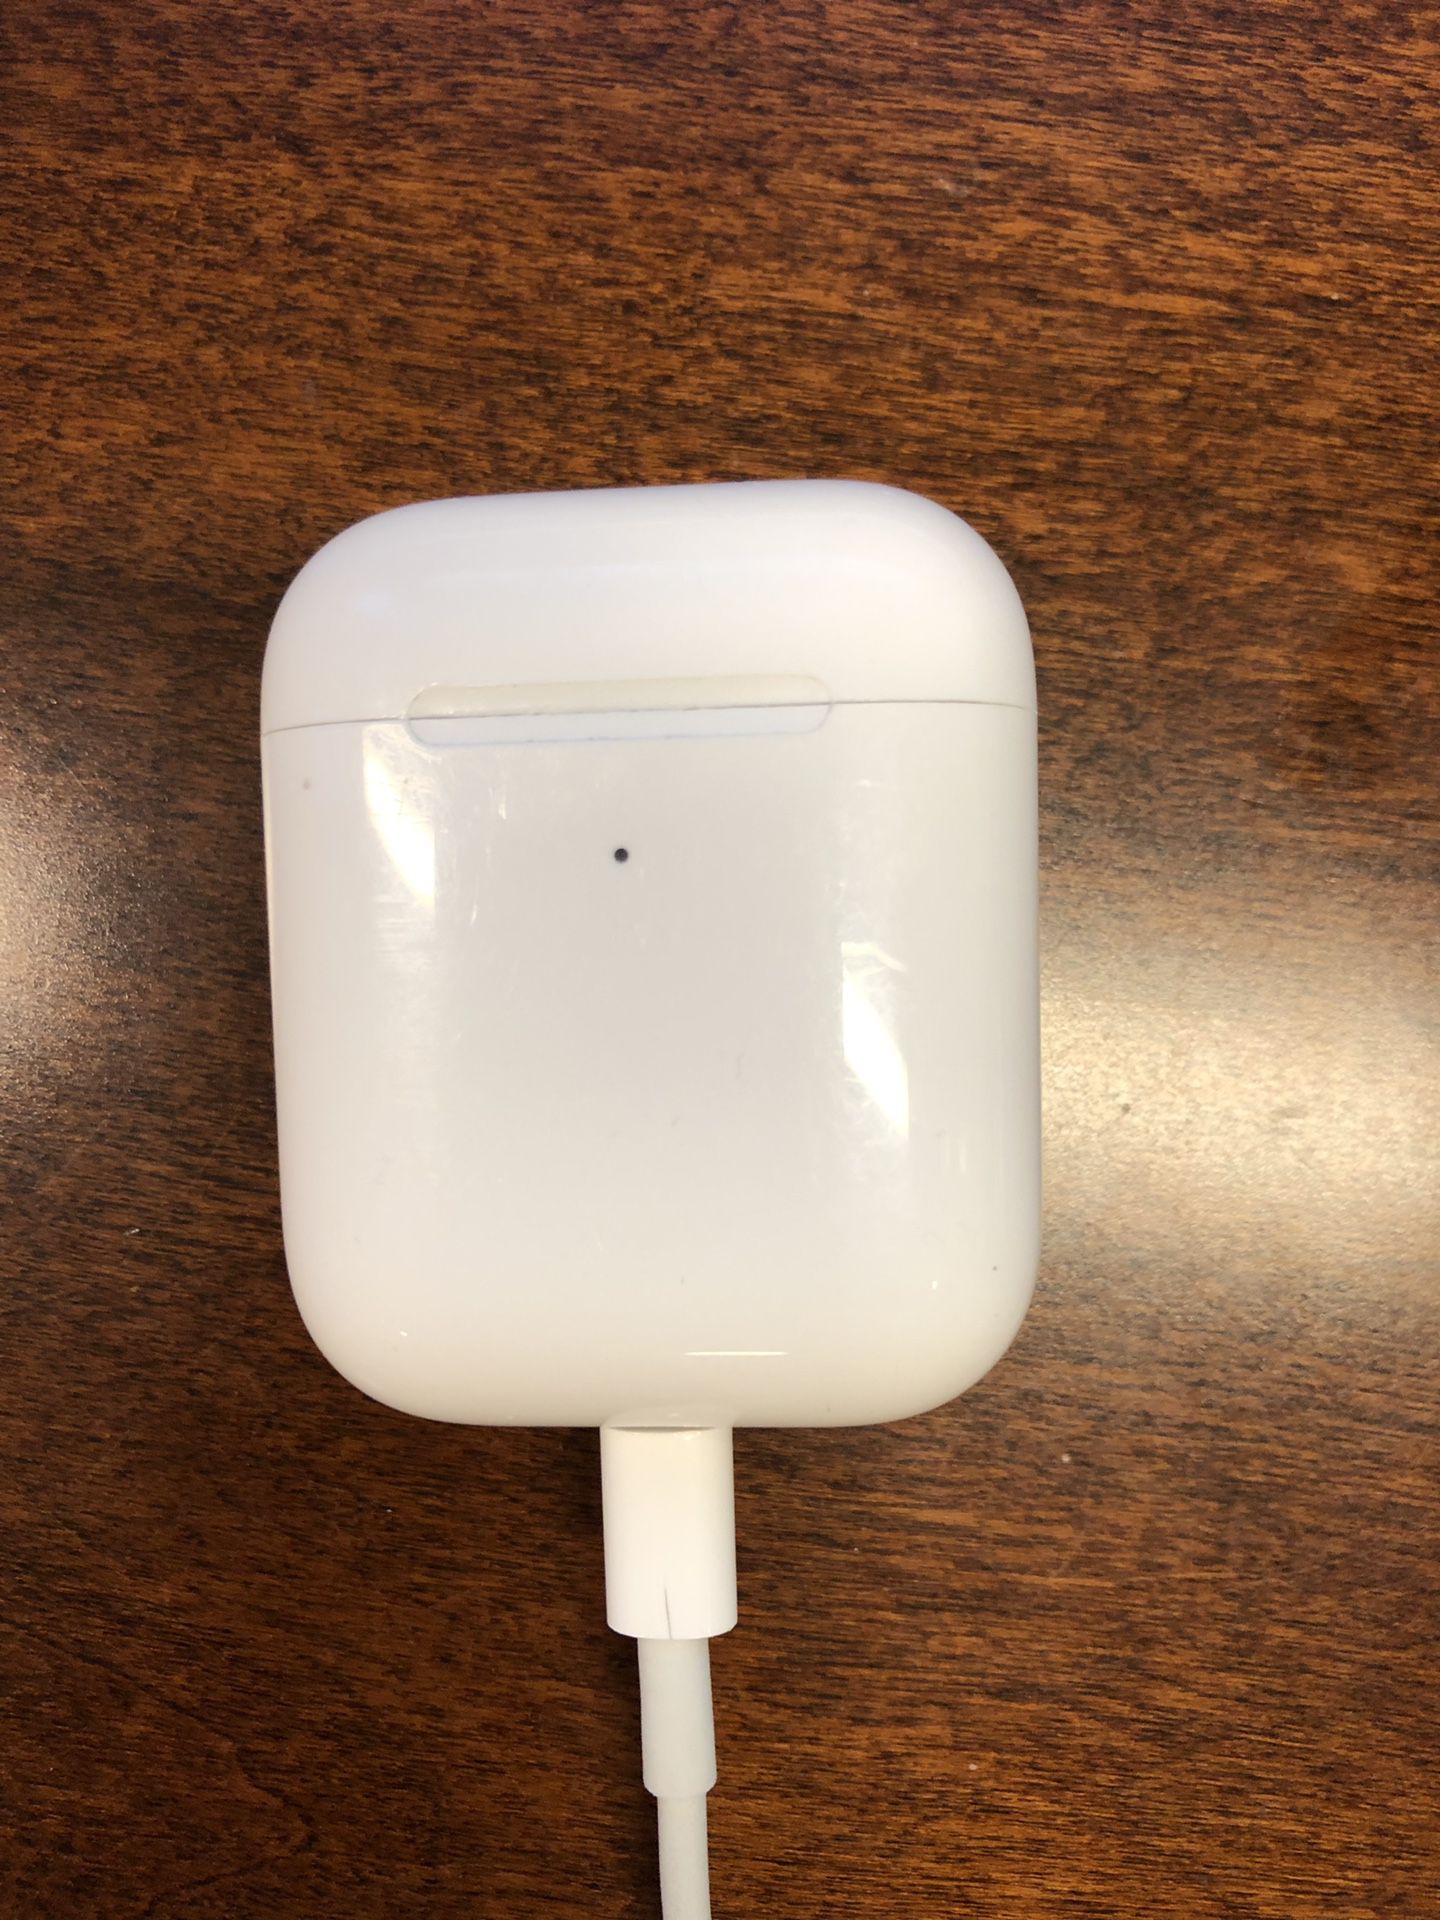 Wireless AirPods 2nd Generation - CHARGING CASE ONLY